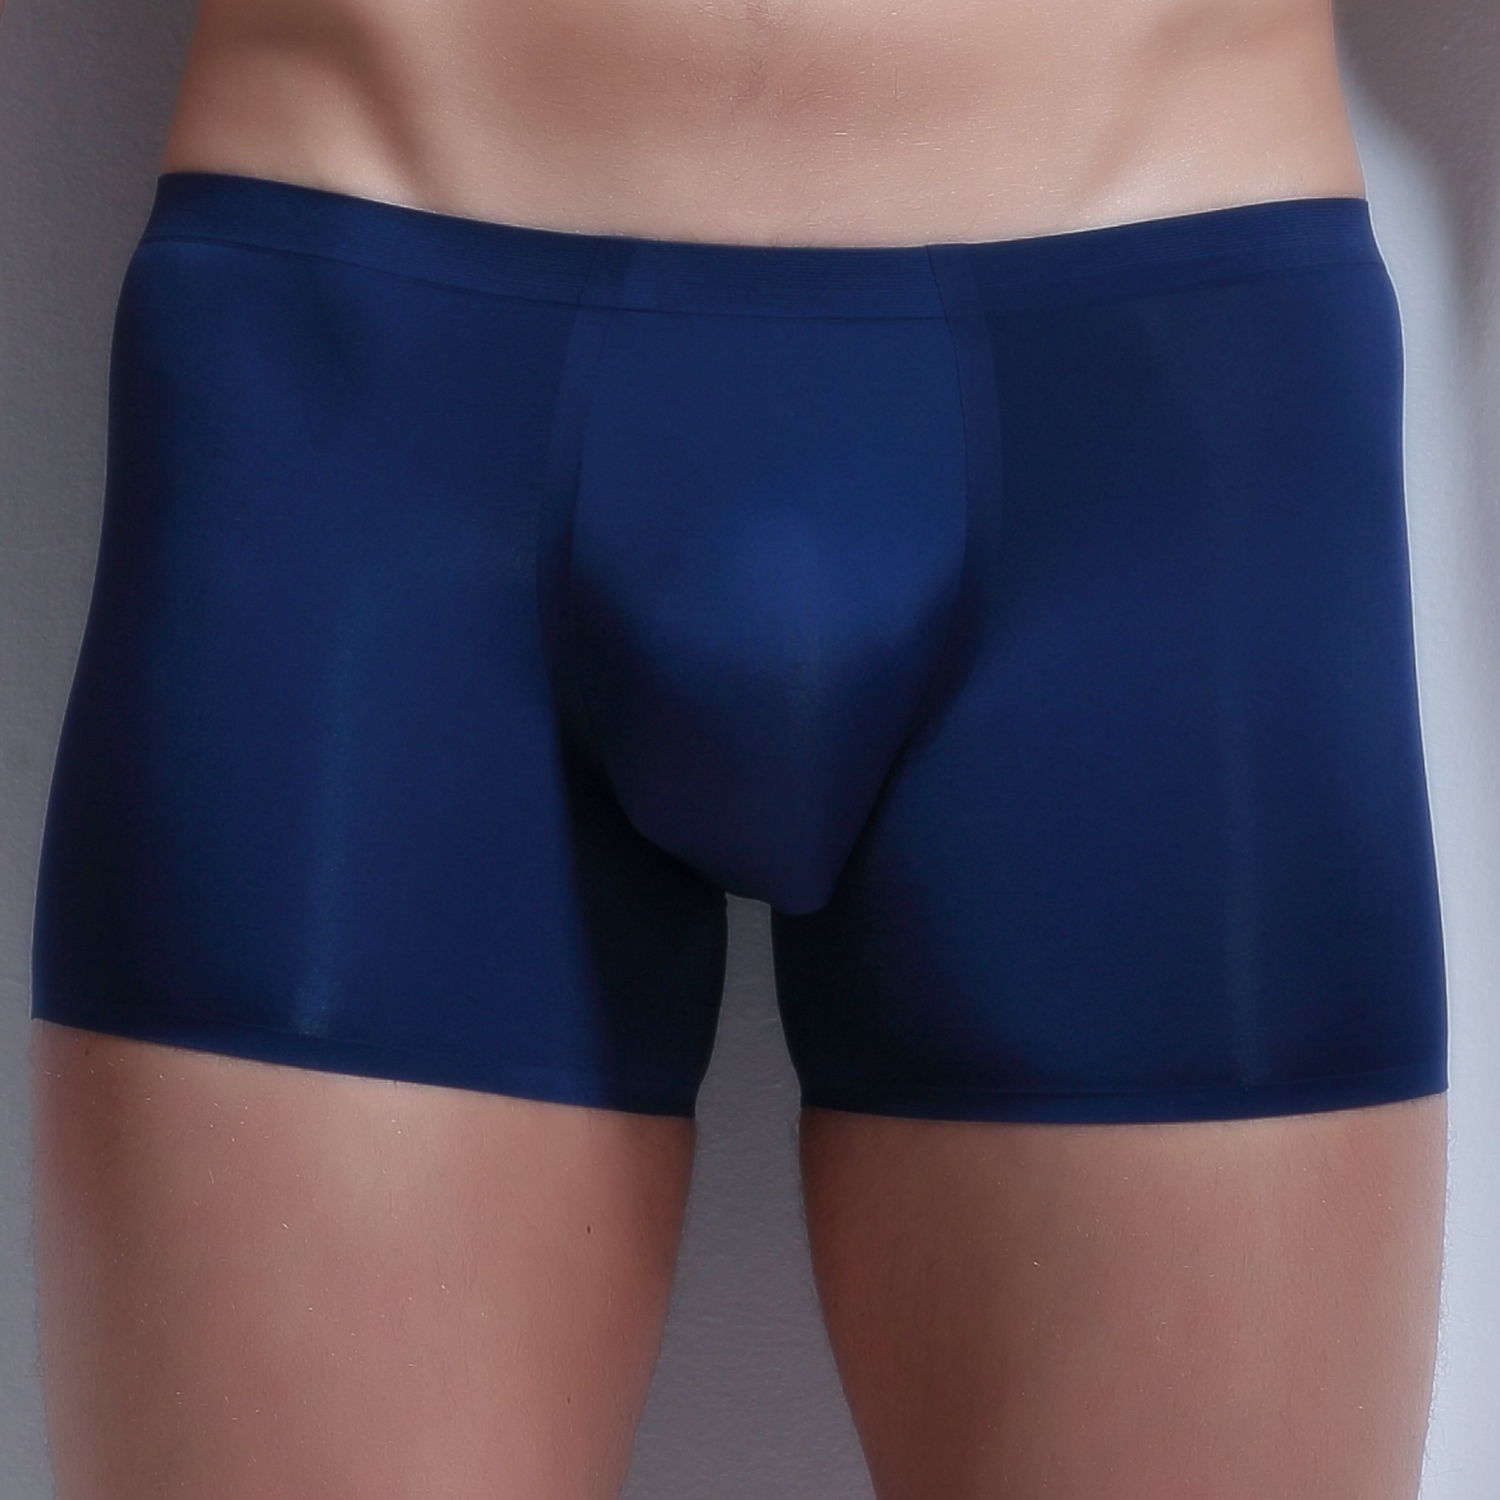 Seamless Mens Boxer Shorts Bulge Pouch Underwear Trunks Soft Smooth Underpants Ebay